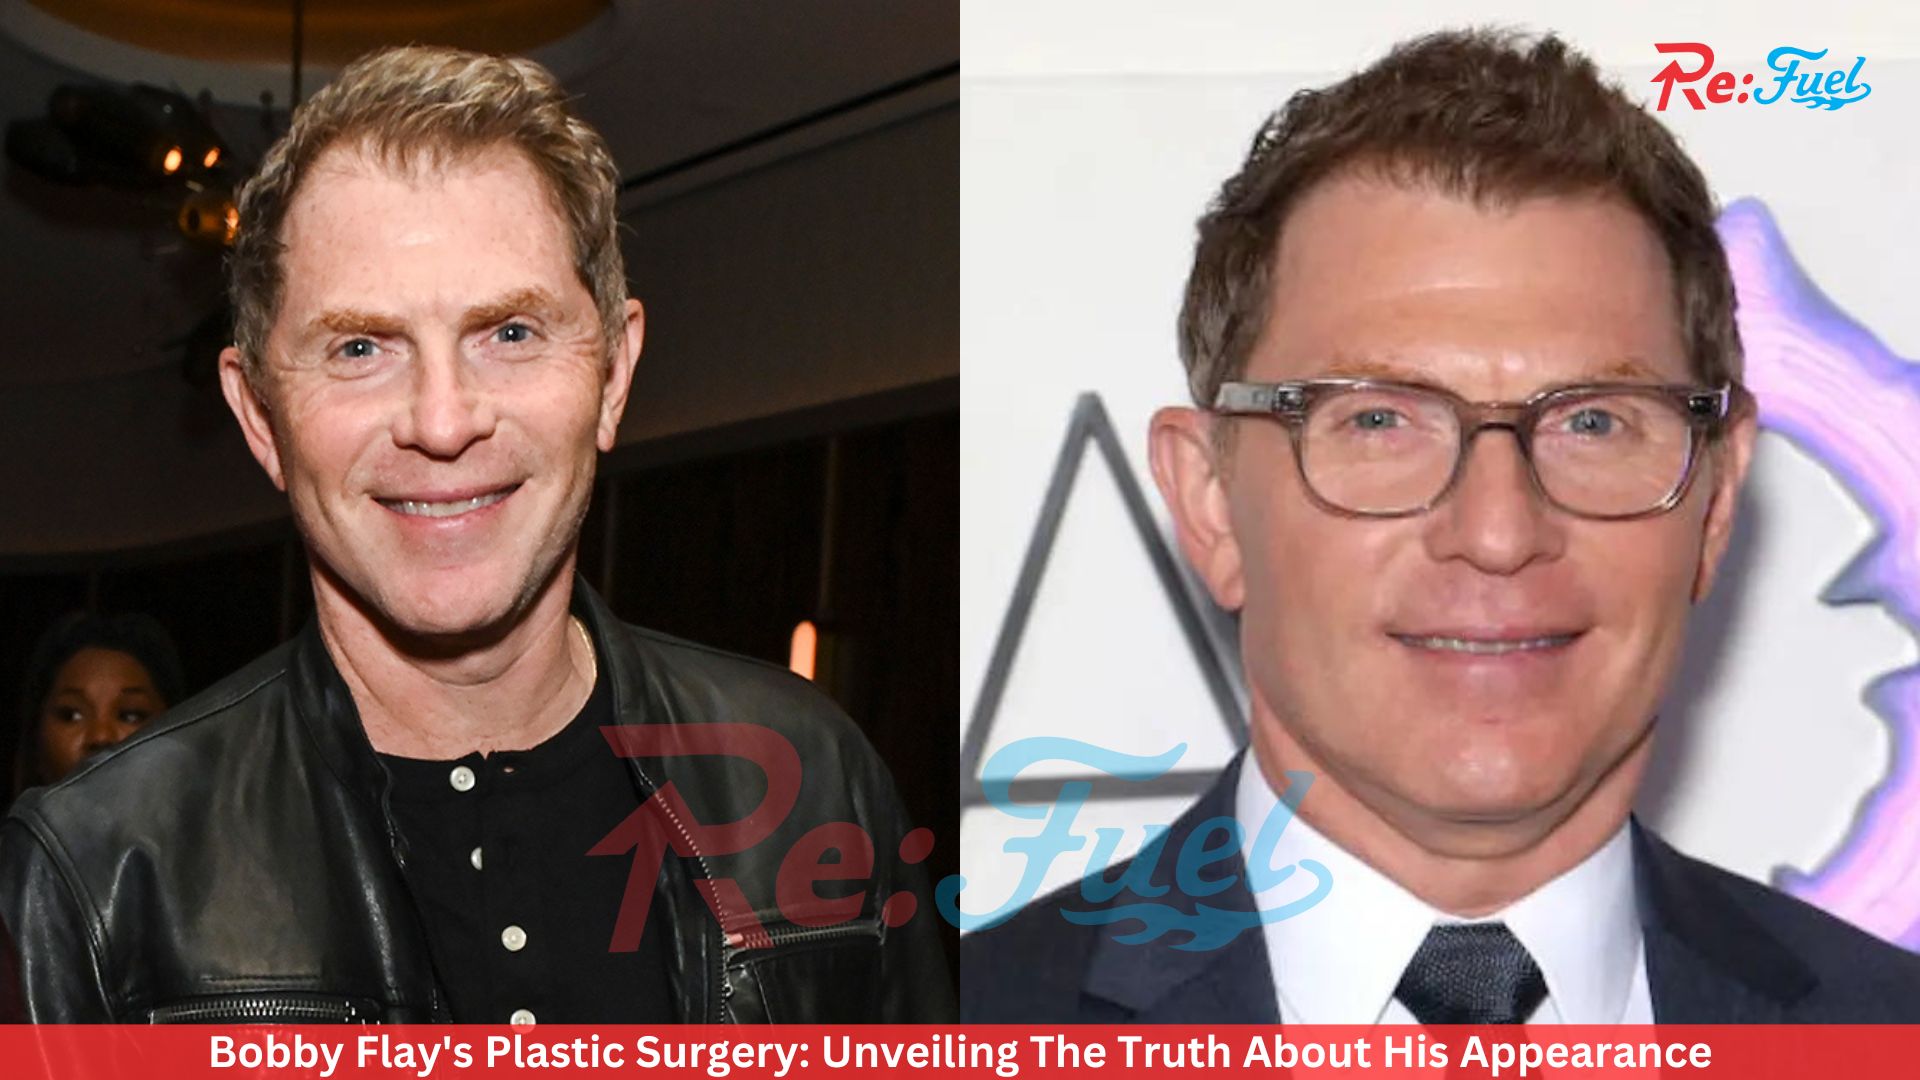 Bobby Flay's Plastic Surgery: Unveiling The Truth About His Appearance